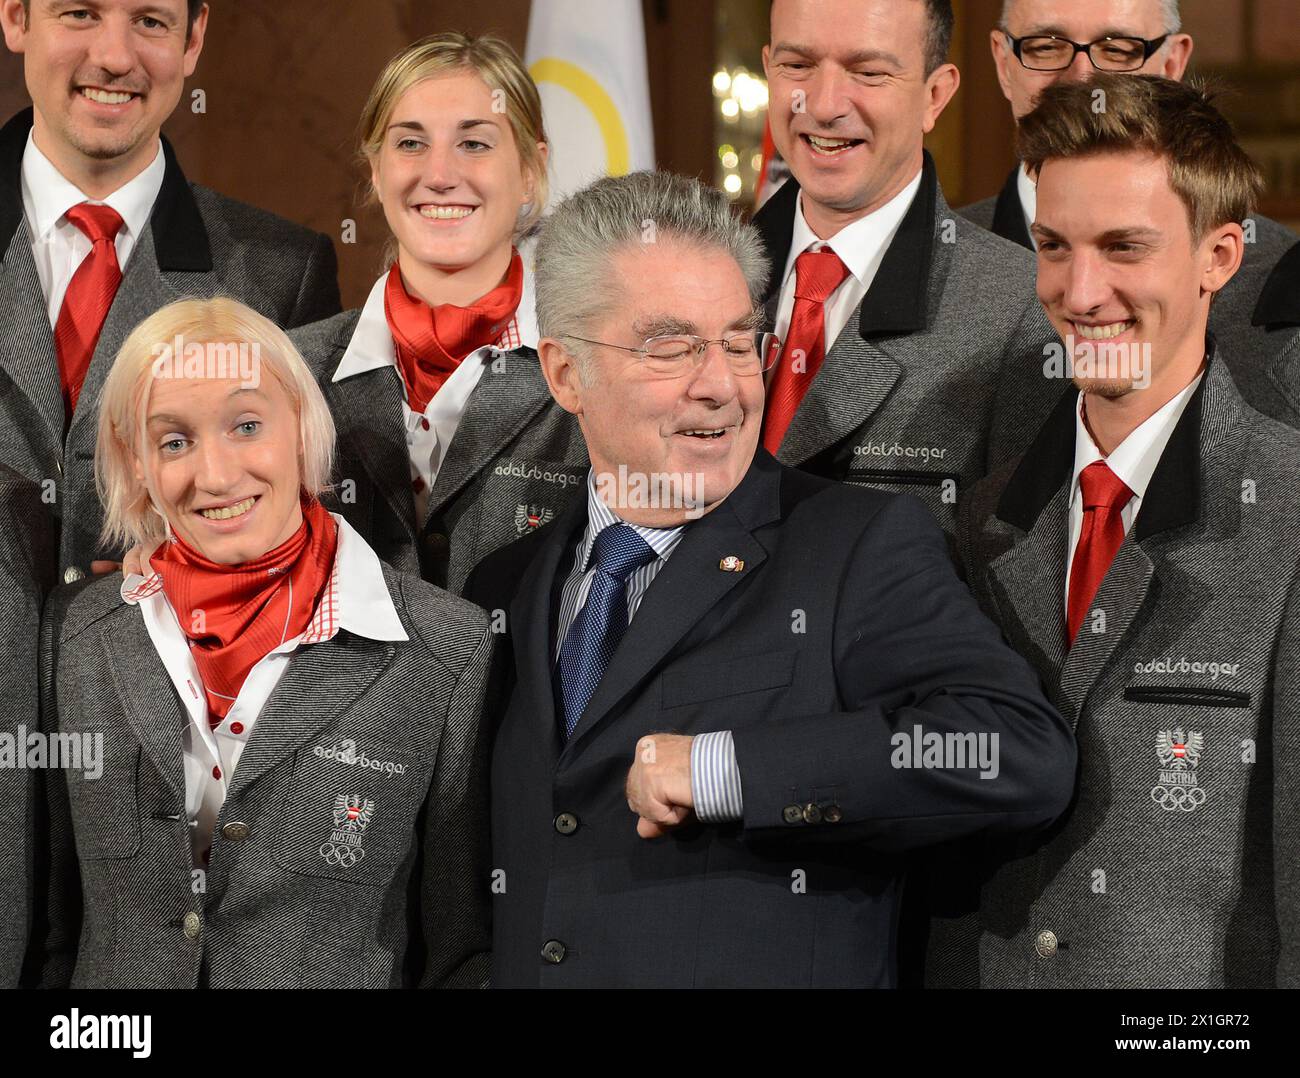 Ski jumper Daniela Iraschko-Stolz, federal president Heinz Fischer and ski jumper Gregor Schlierenzauer pose for photographs during the swearing-in ceremony of the Austrian team for the Sochi Olympic Winter Games at the Hofburg Palace in Vienna, Austria, 29 January 2014. - 20140129 PD1703 - Rechteinfo: Rights Managed (RM) Stock Photo